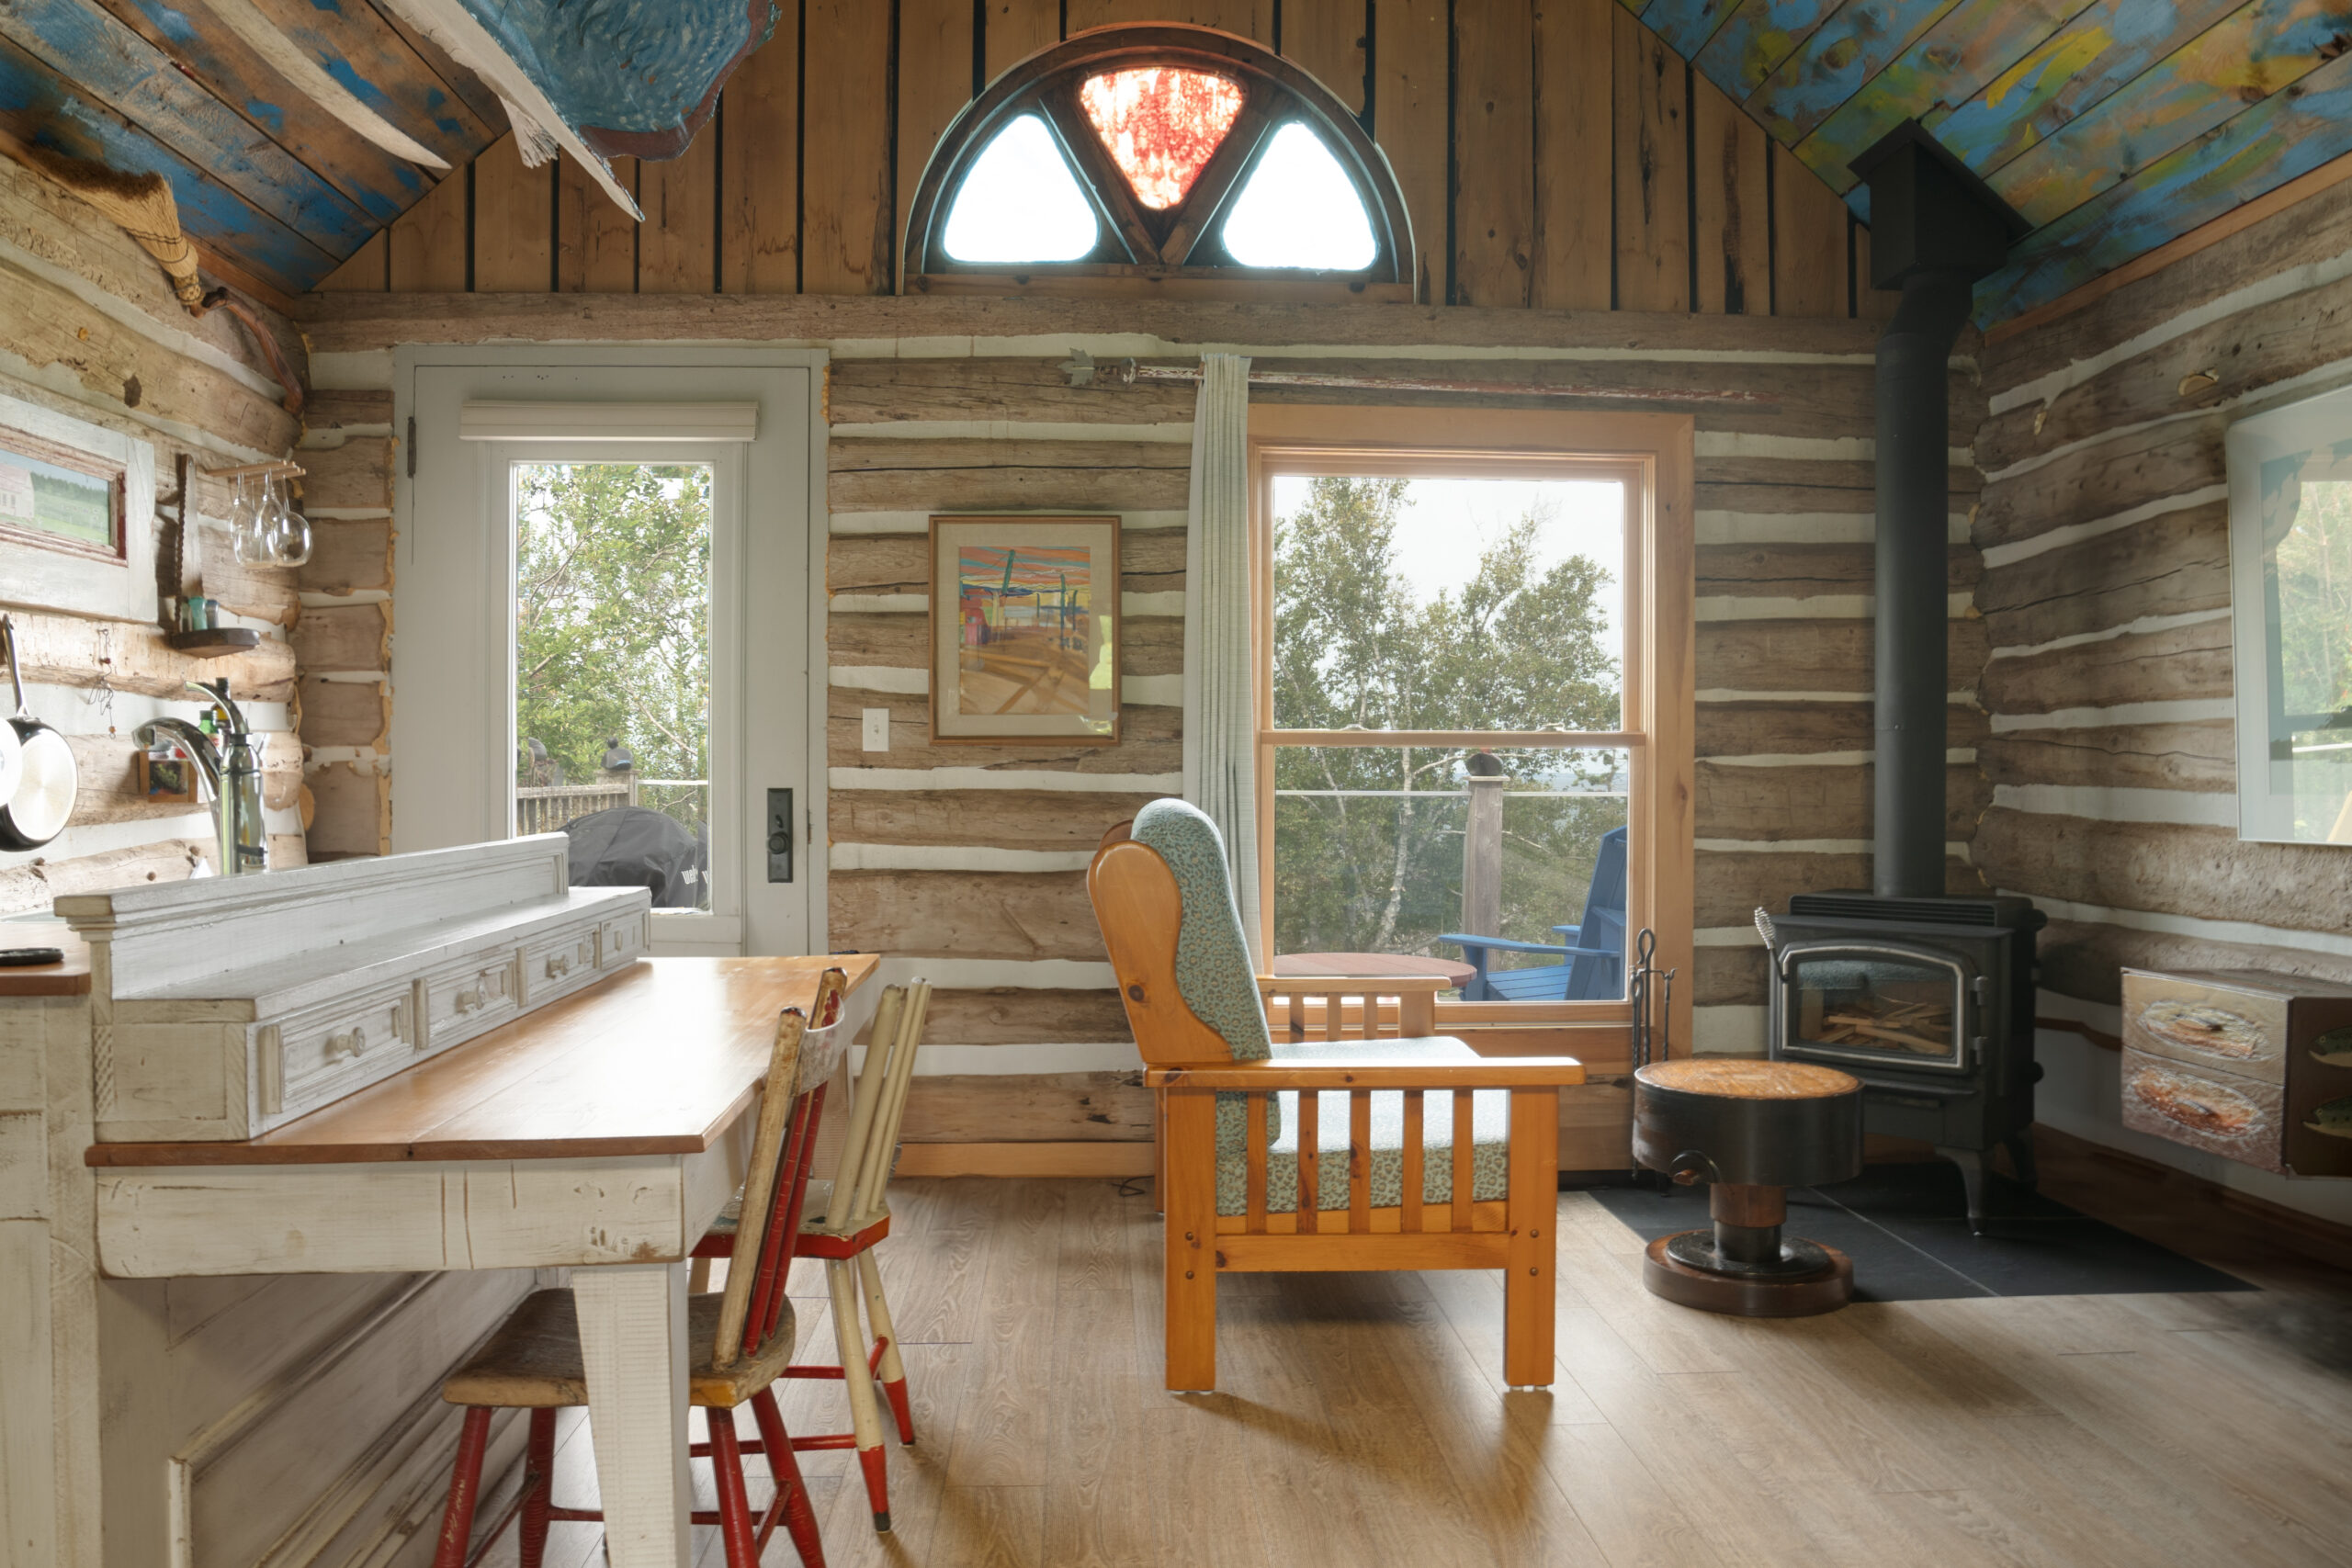 Interior of a small log cabin, with big windows, a small table, a wood stove, and a chair.